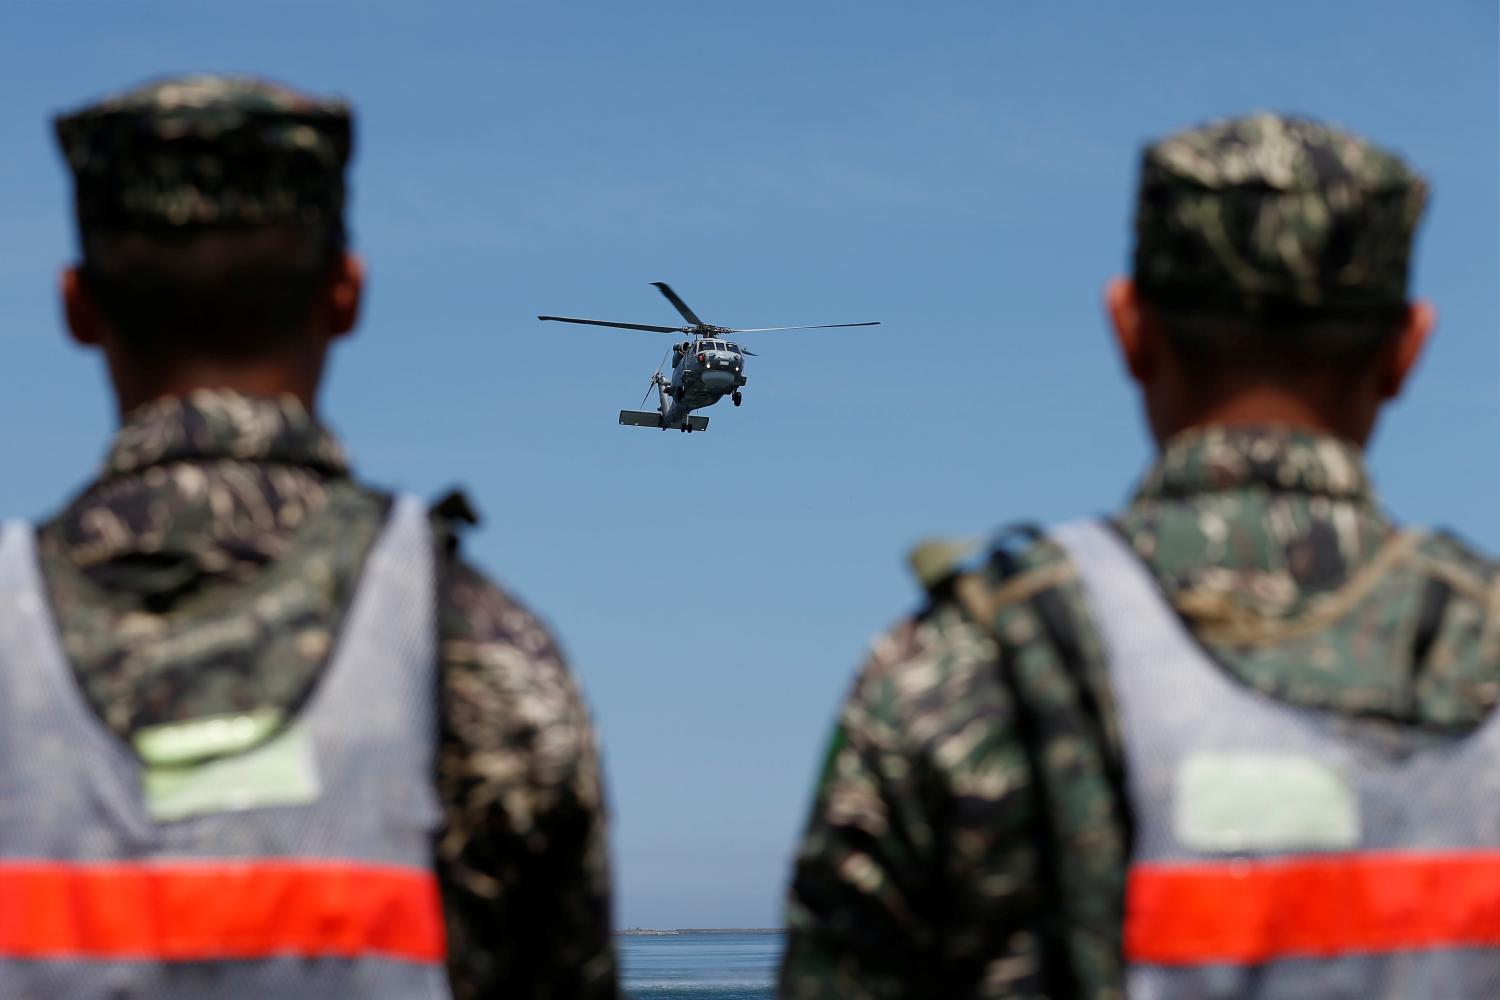 A Sikorsky S-70C helicopter takes part in a military drill at navy base in Kaohsiung, Taiwan